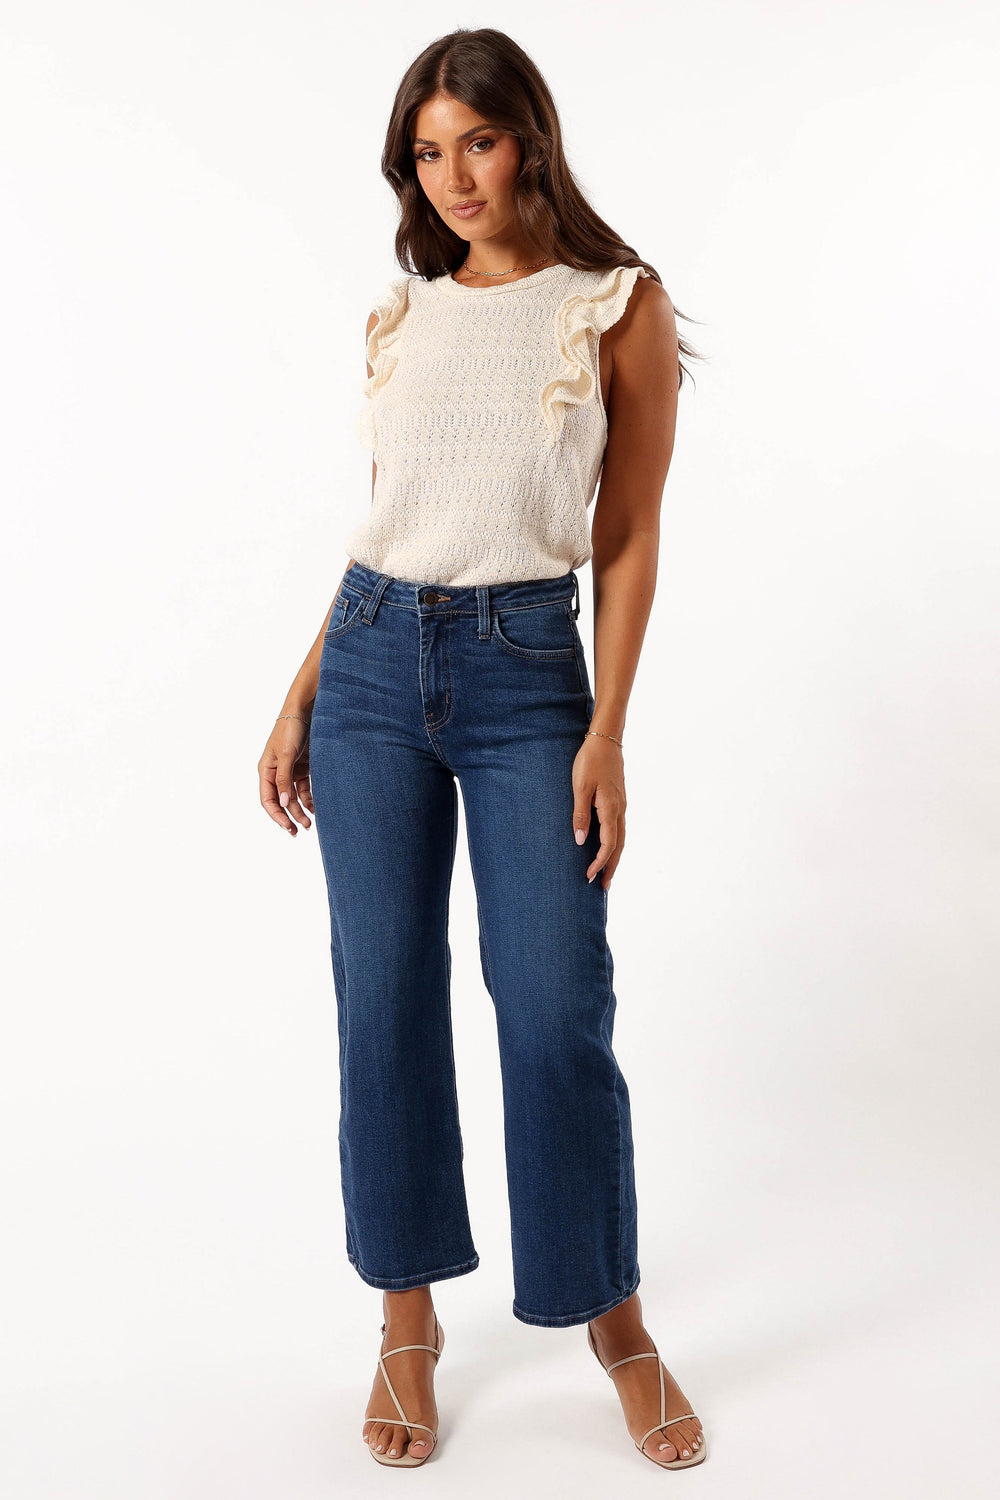 Petal and Pup USA TOPS Marlene Knit Top - Ivory